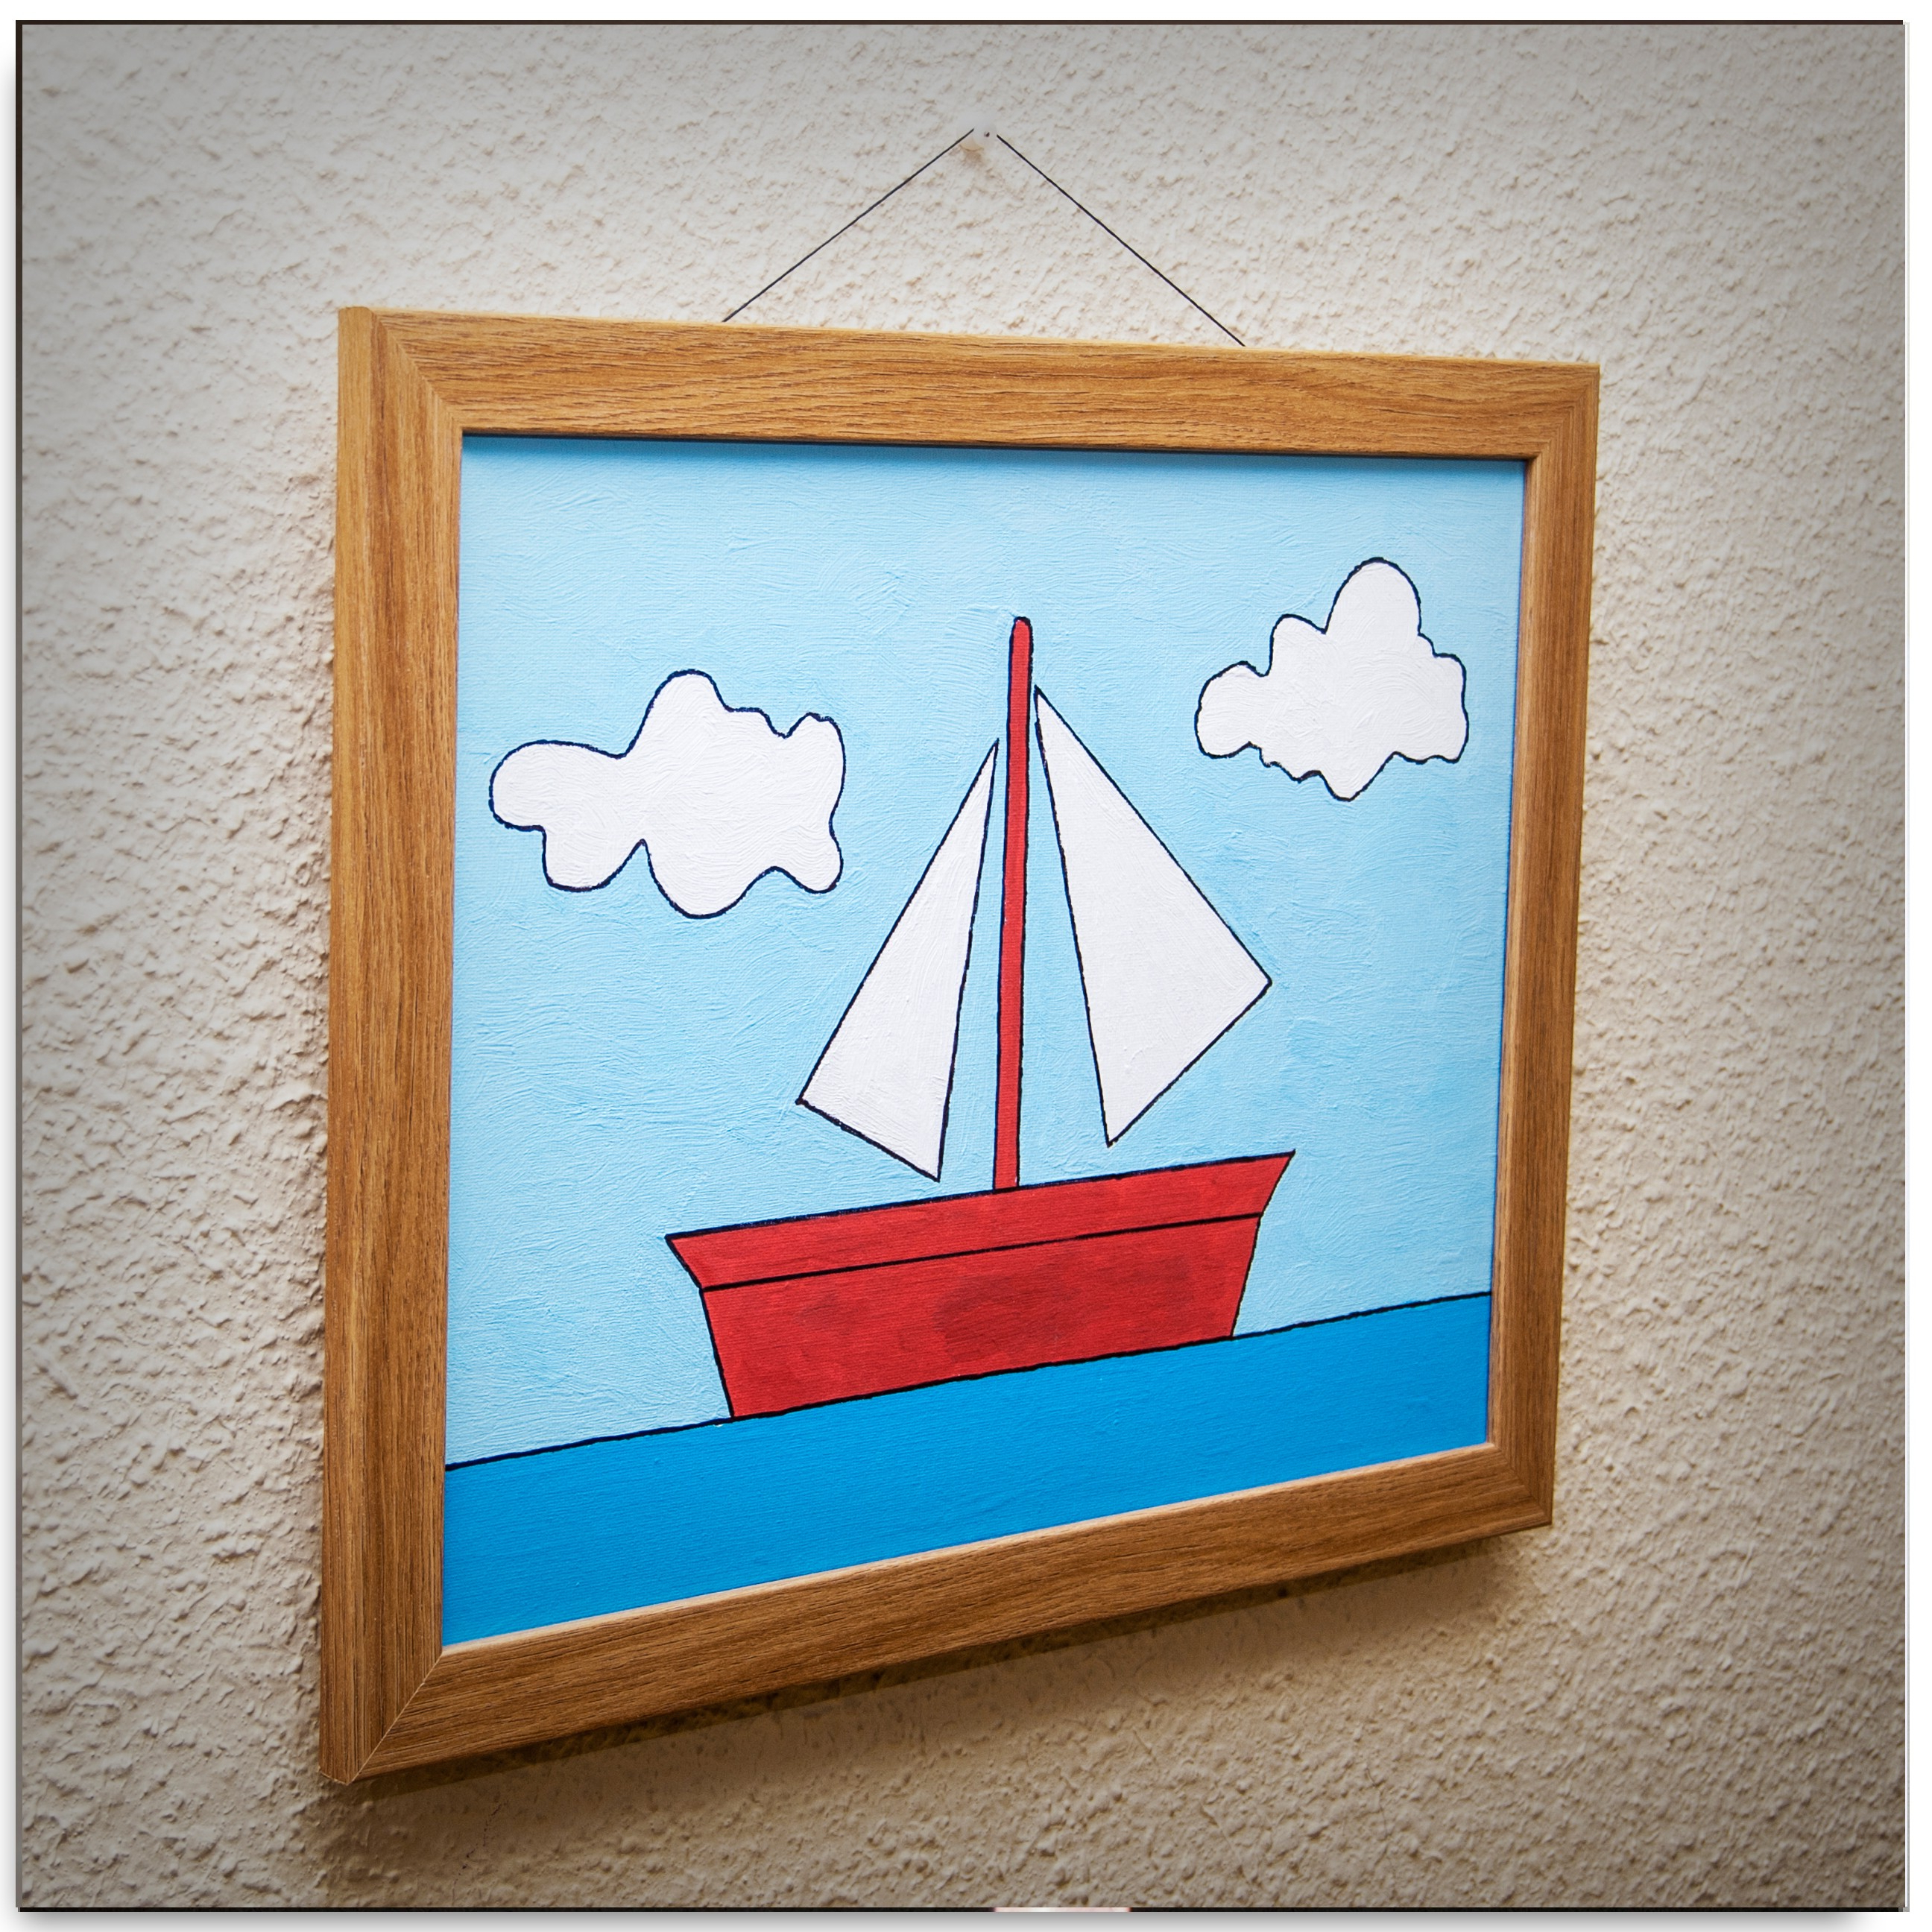 2592x2592 Simpsons Living Room Painting Simpsons Boat Painting - The Simpsons Sailboat Painting